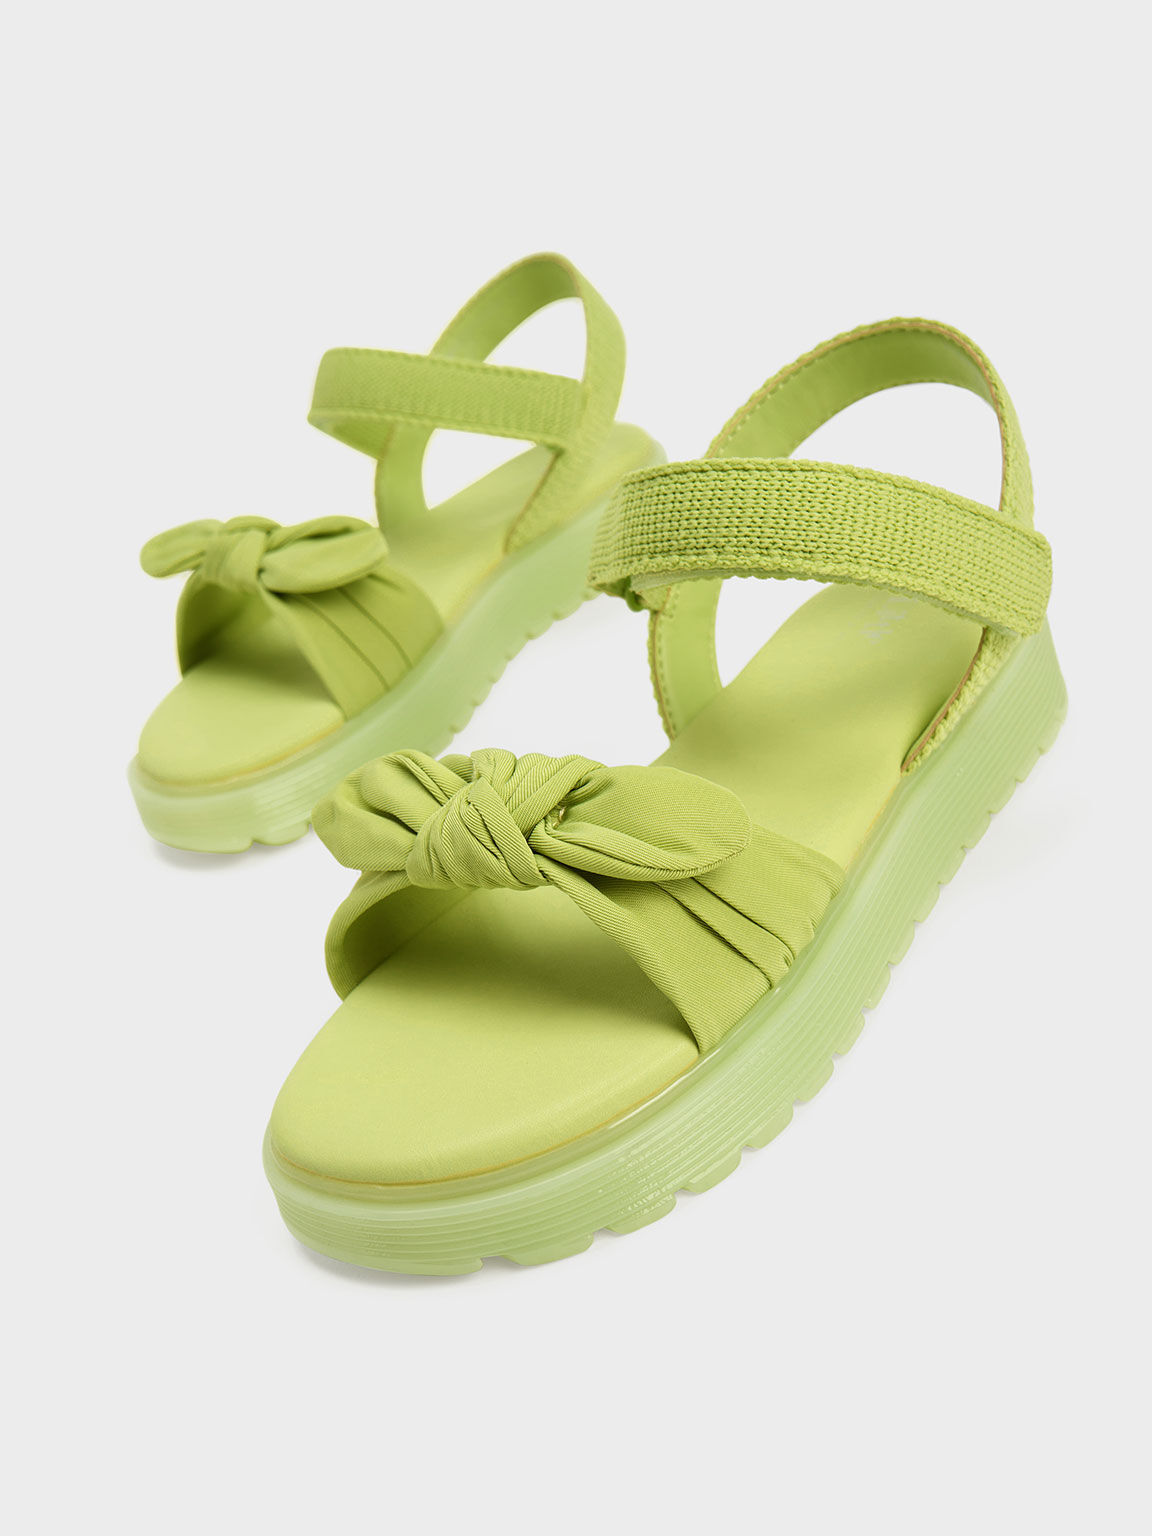 Girls' Nylon Knotted Sandals, Lime, hi-res